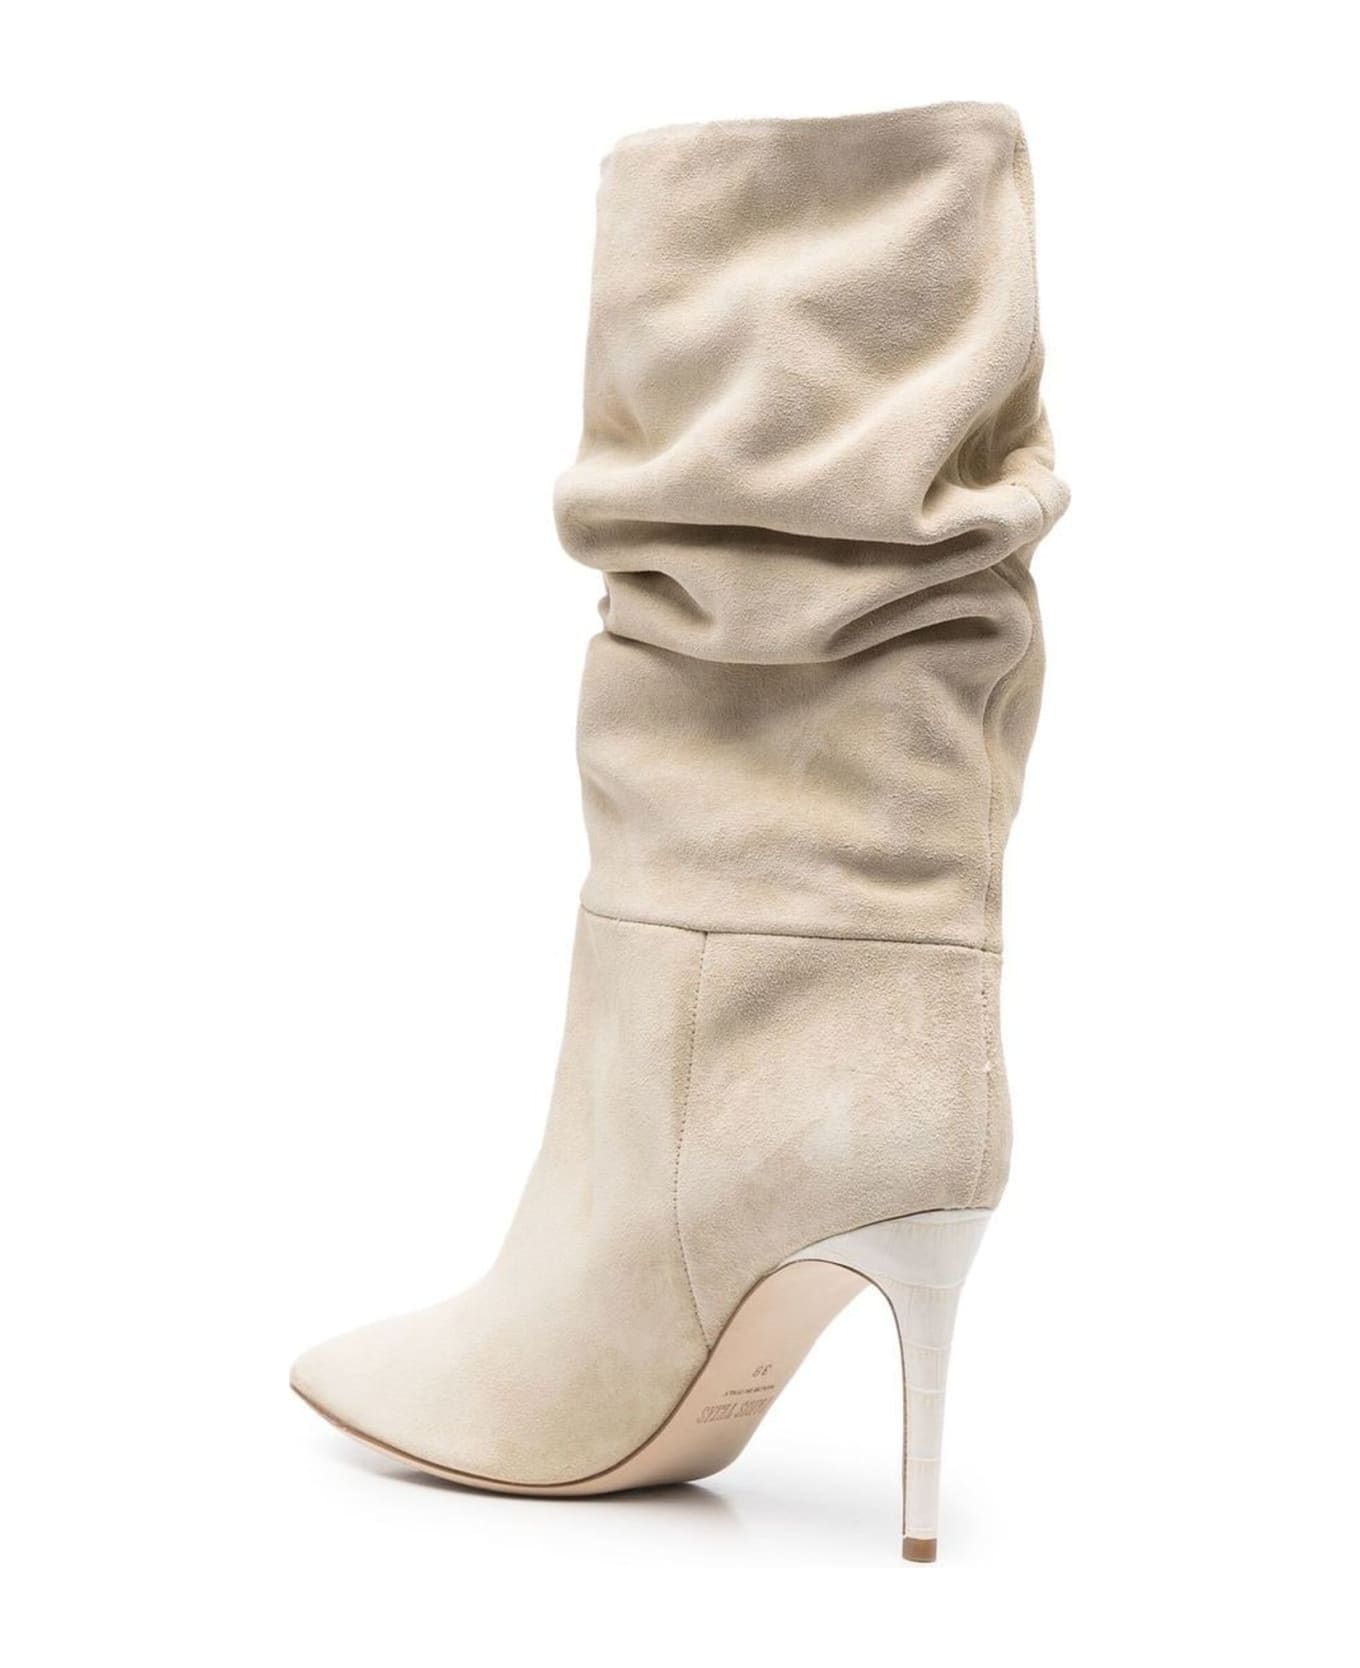 Paris Texas Beige Calf Leather Suede Ankle Boots - Beige ブーツ